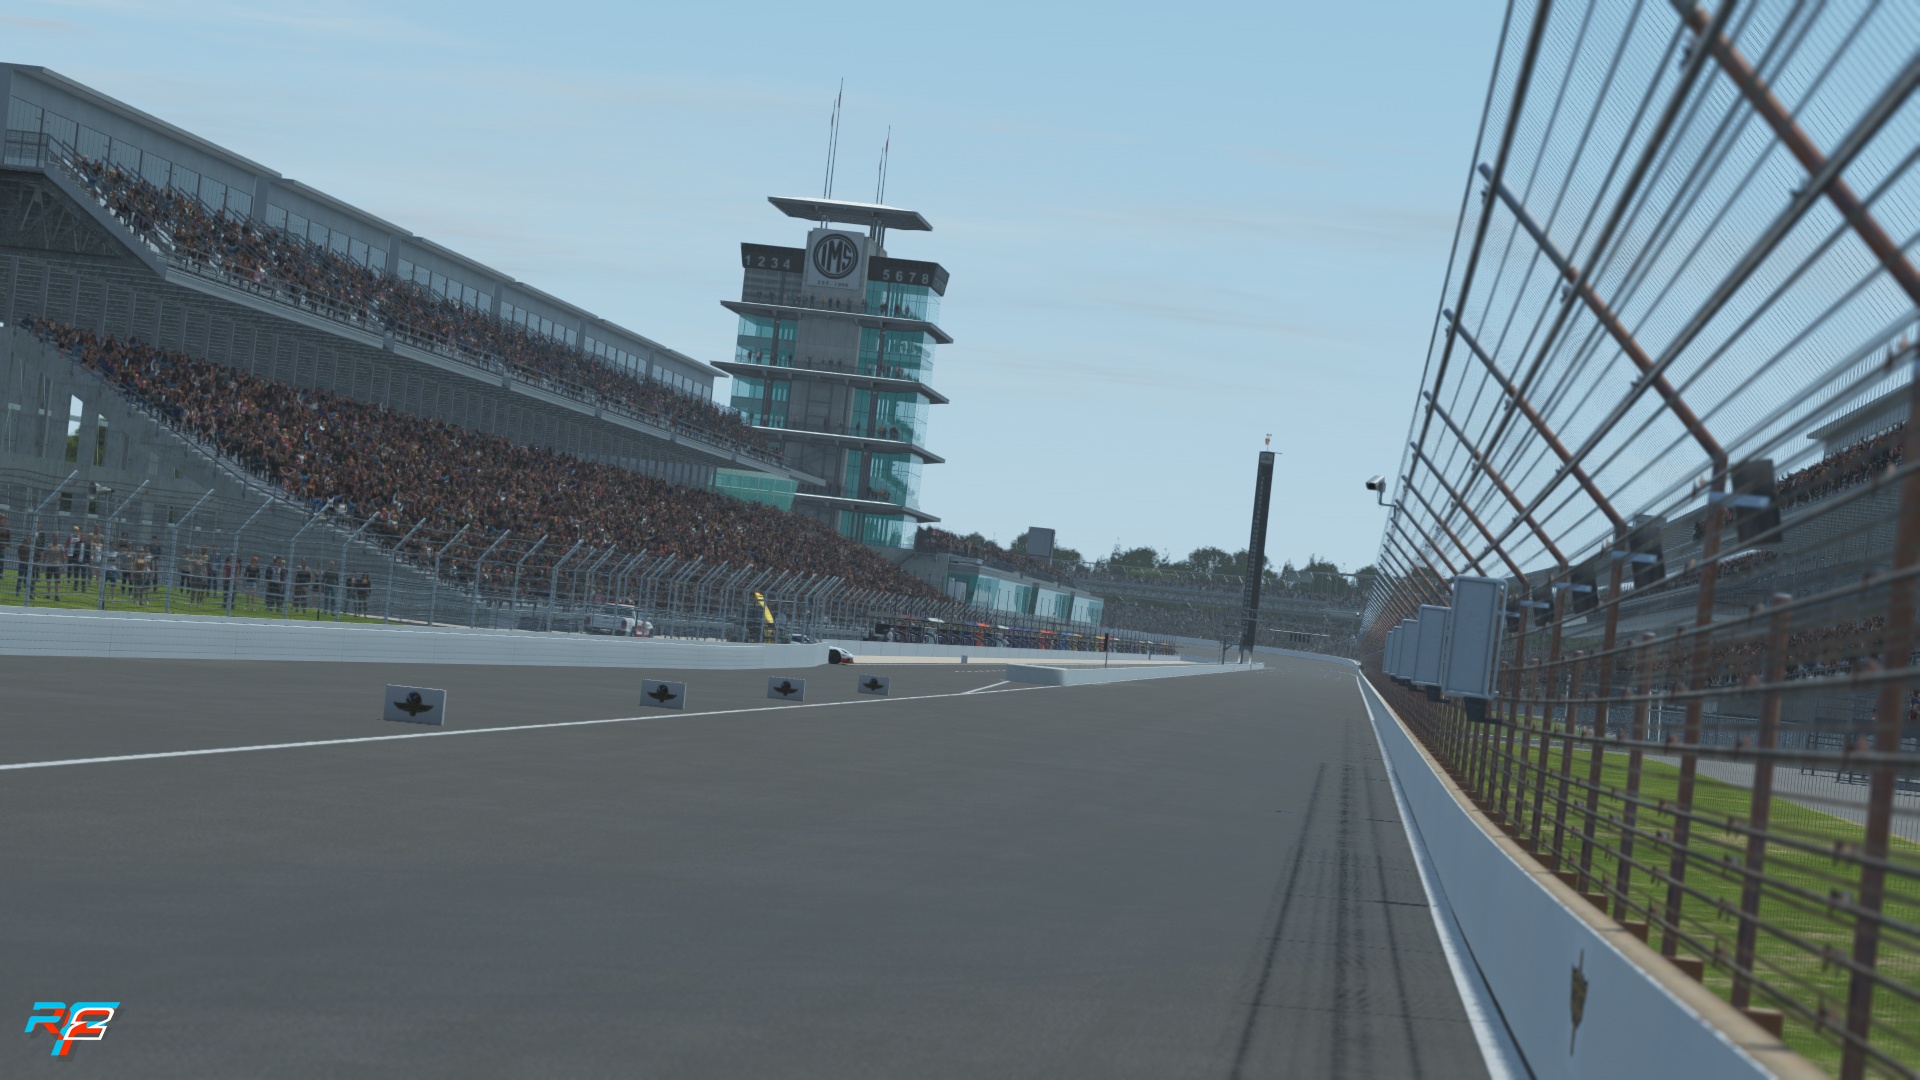 More information about "rFactor 2 Build update ed Indianapolis aggiornata"